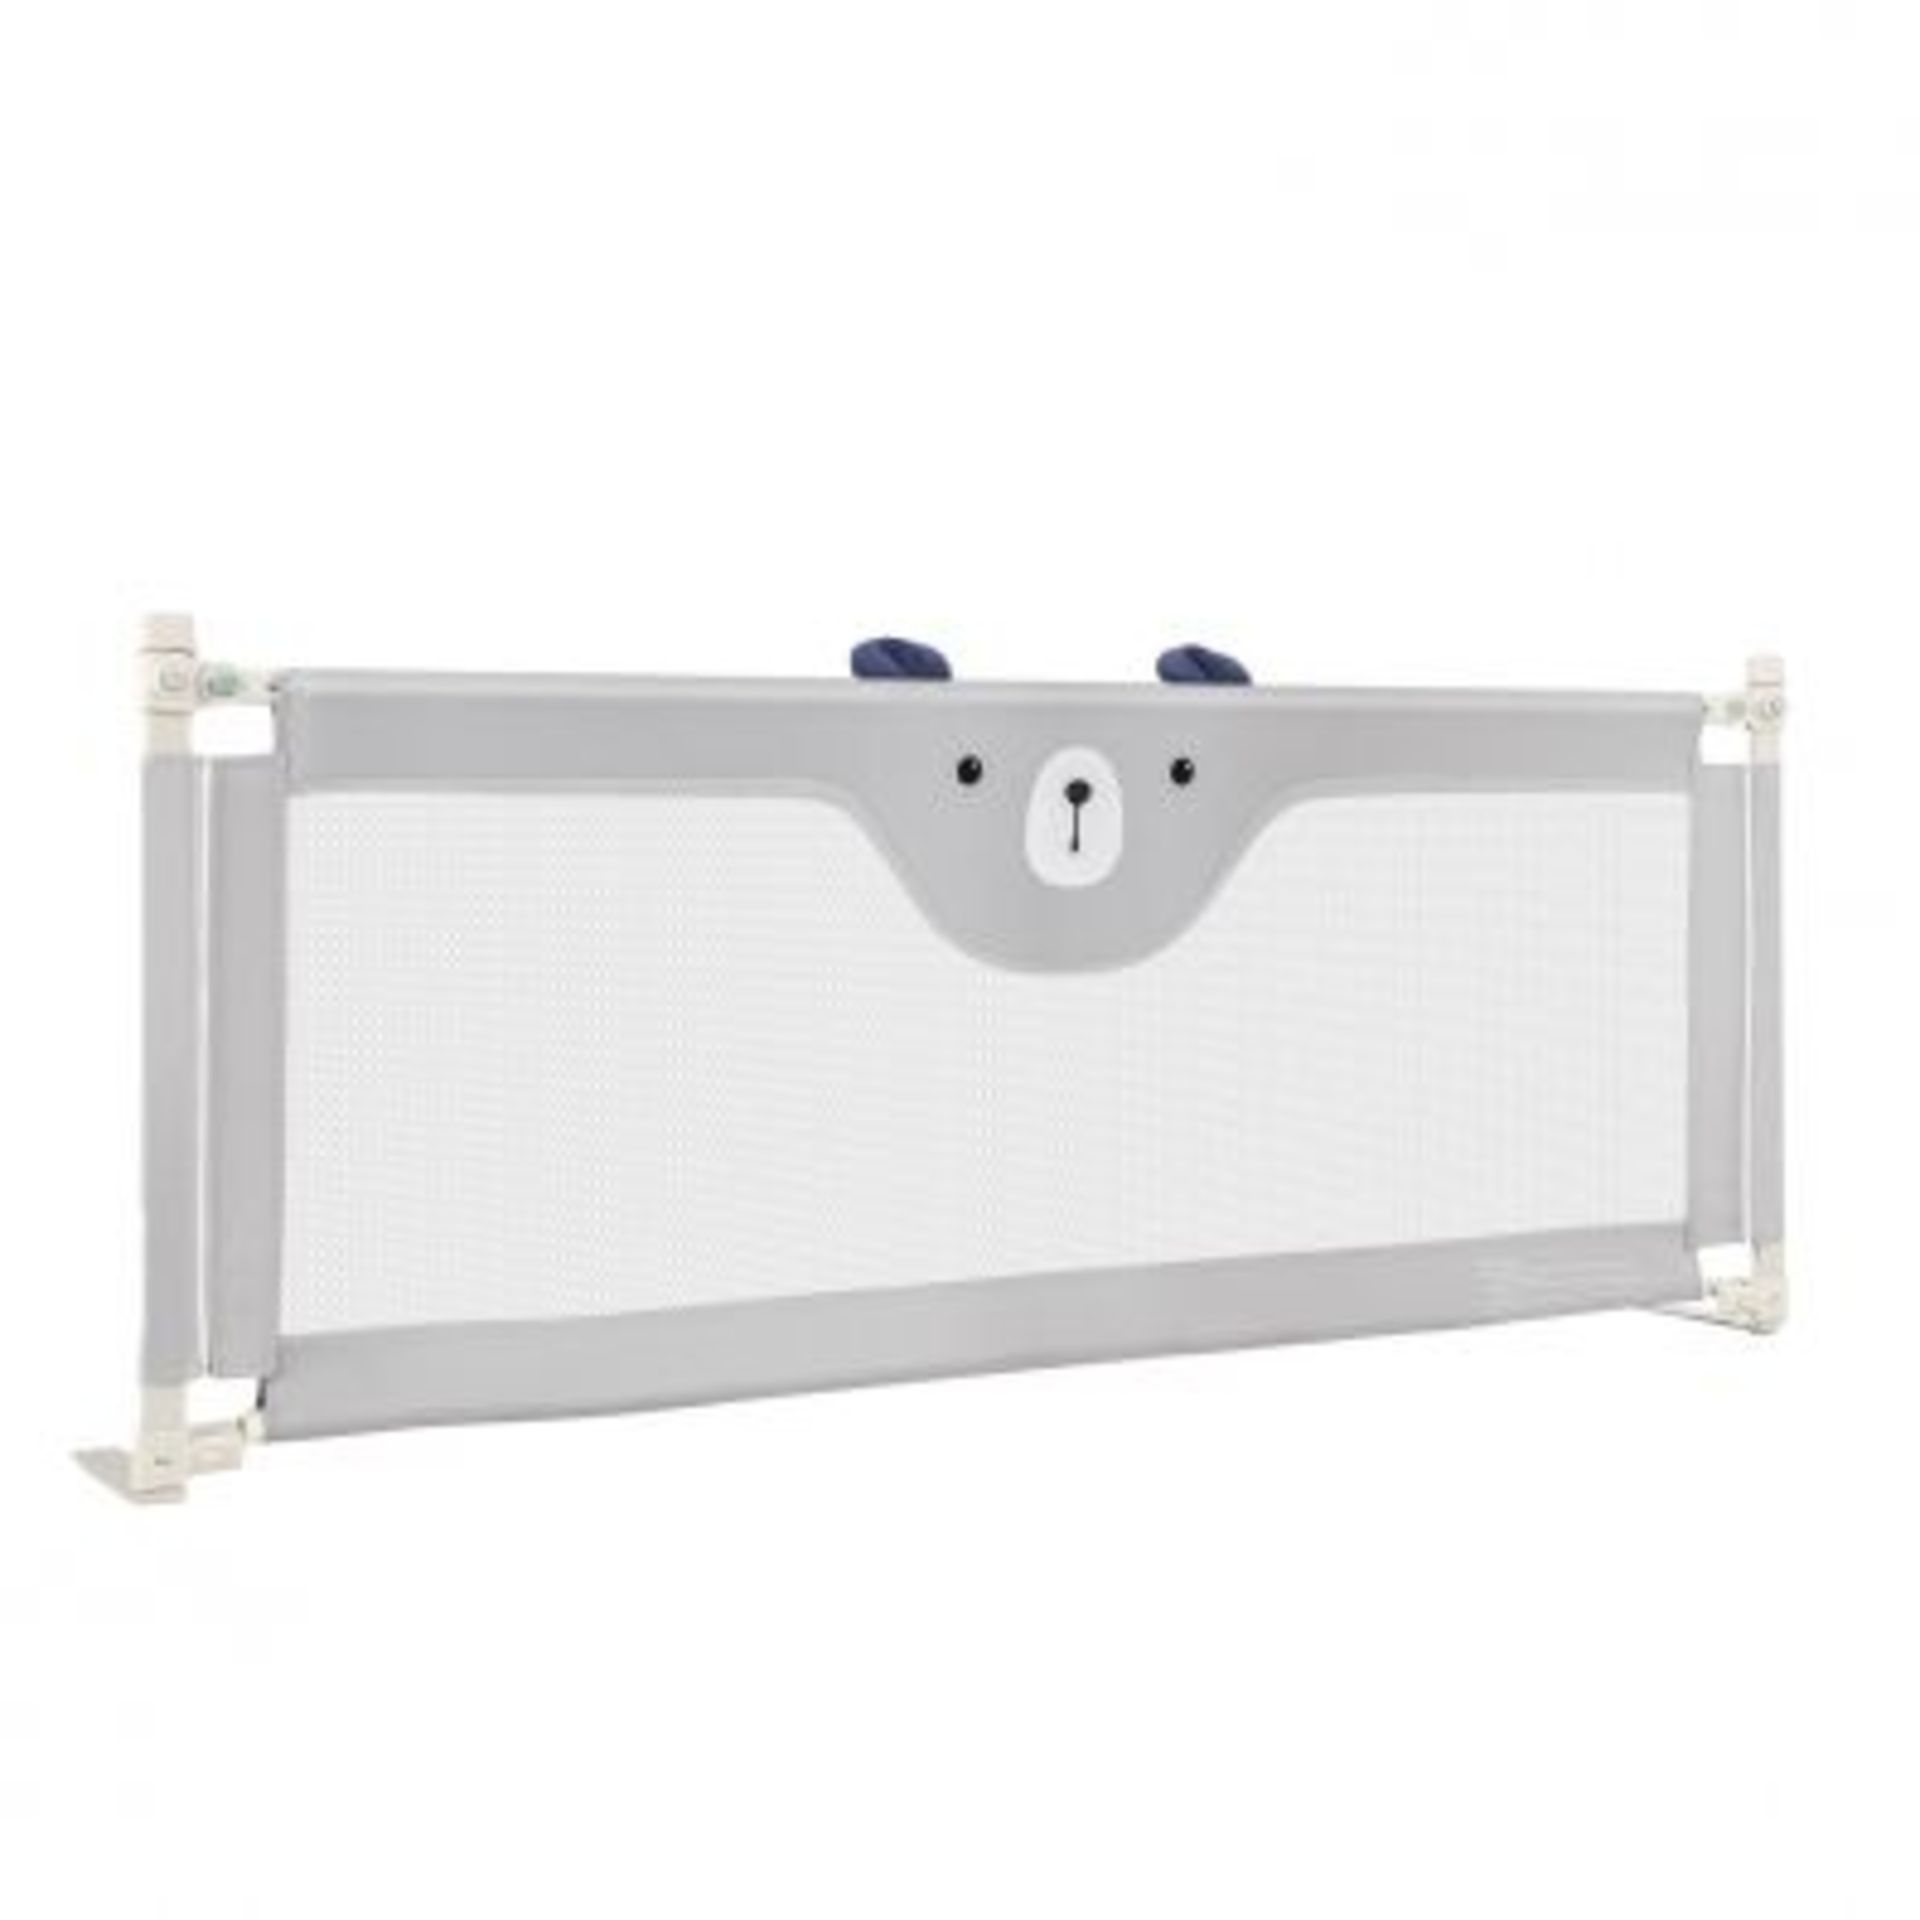 195cm Bed Rail with Double Safety Lock and Adjustable Height - ER54